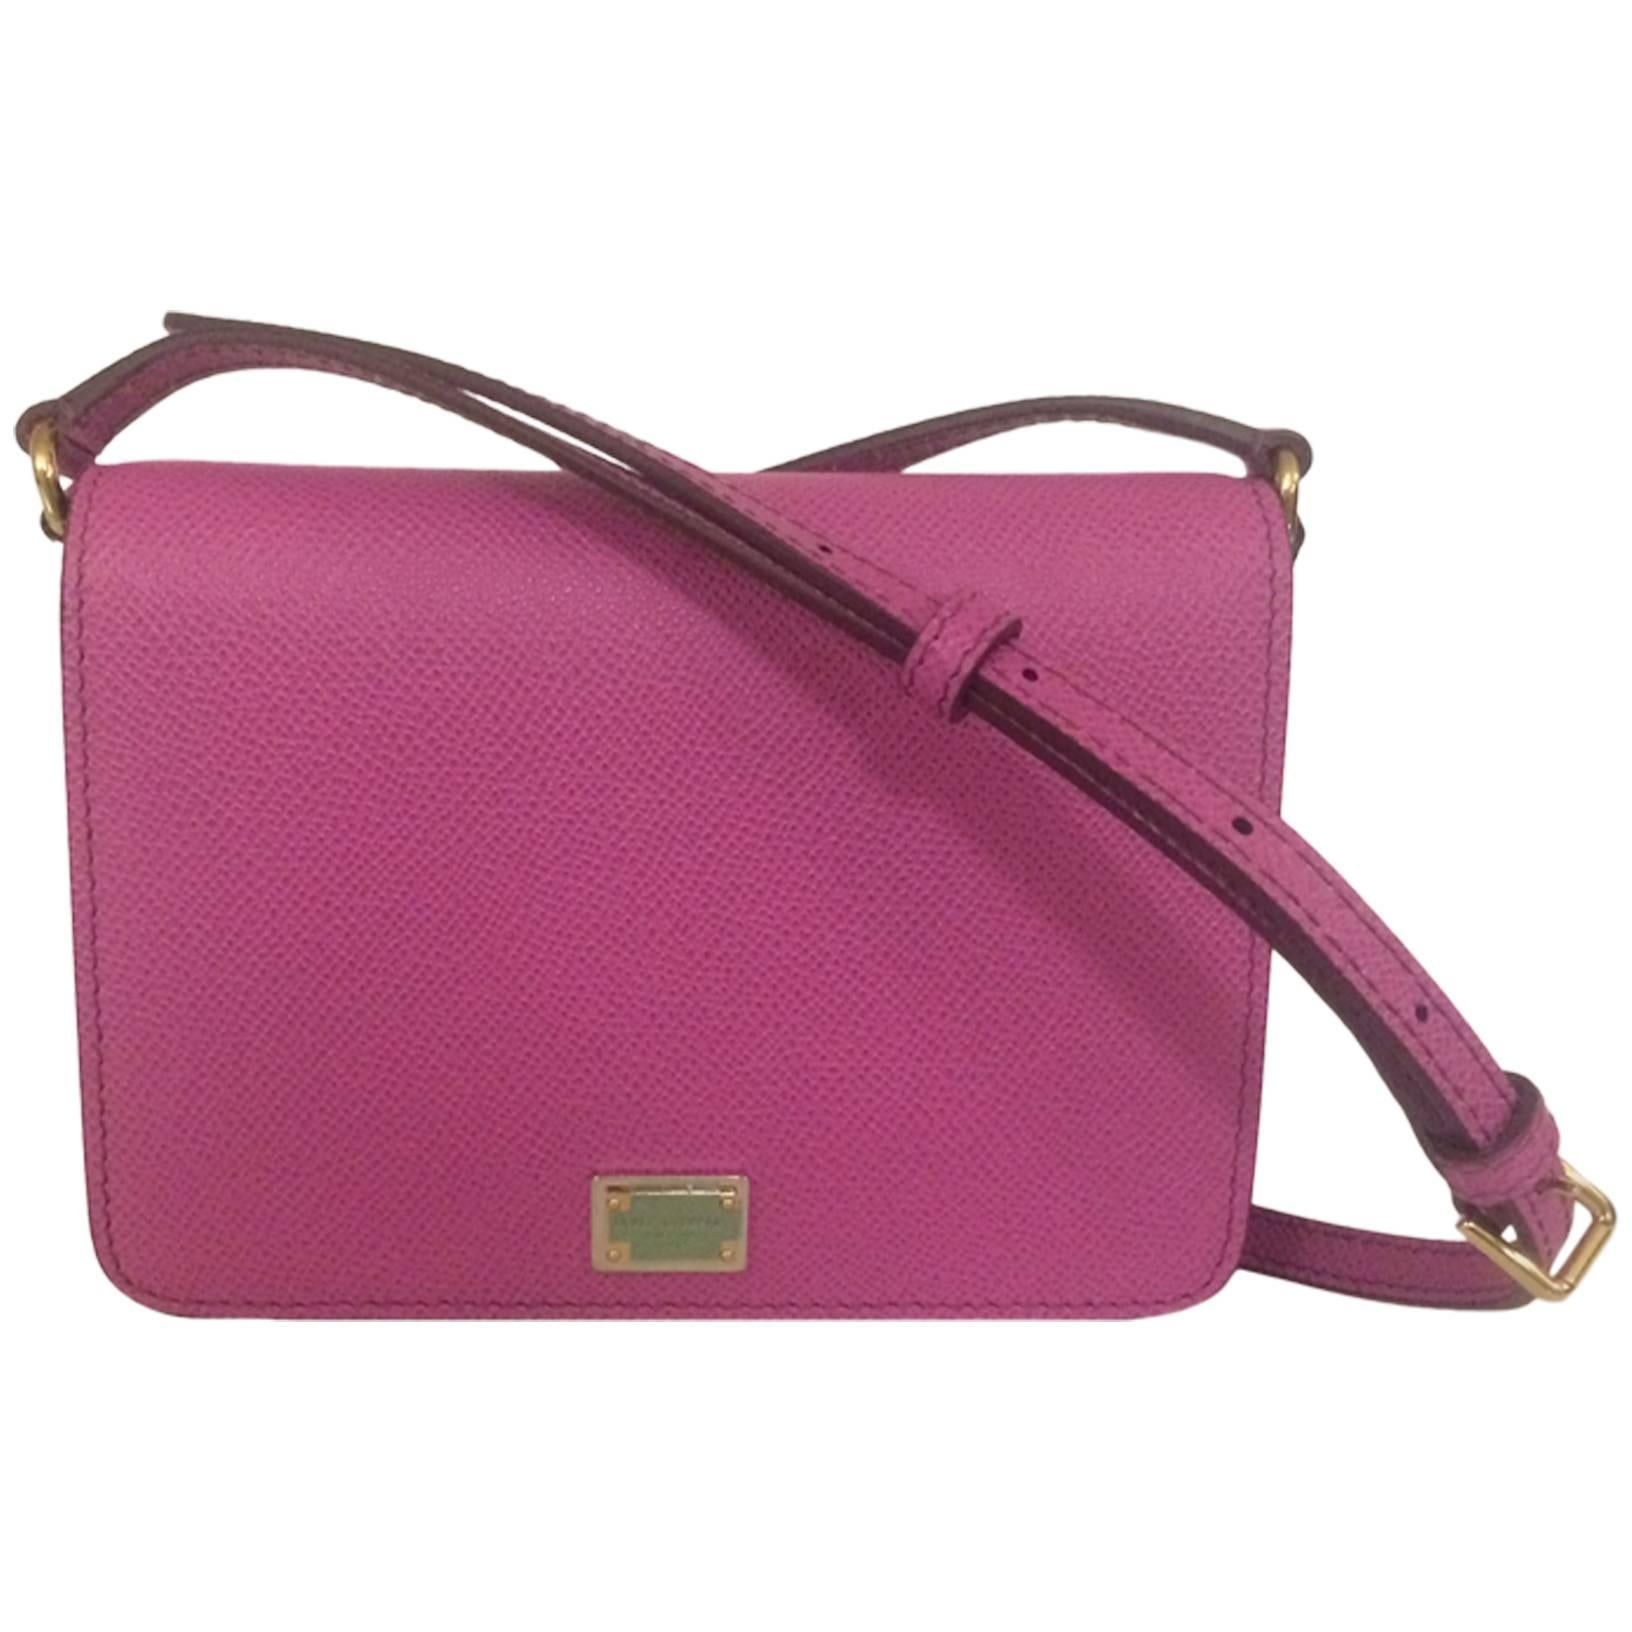 Dolce & Gabbana New with Tags Purple Pink Leather Cross Body Purse Bag 